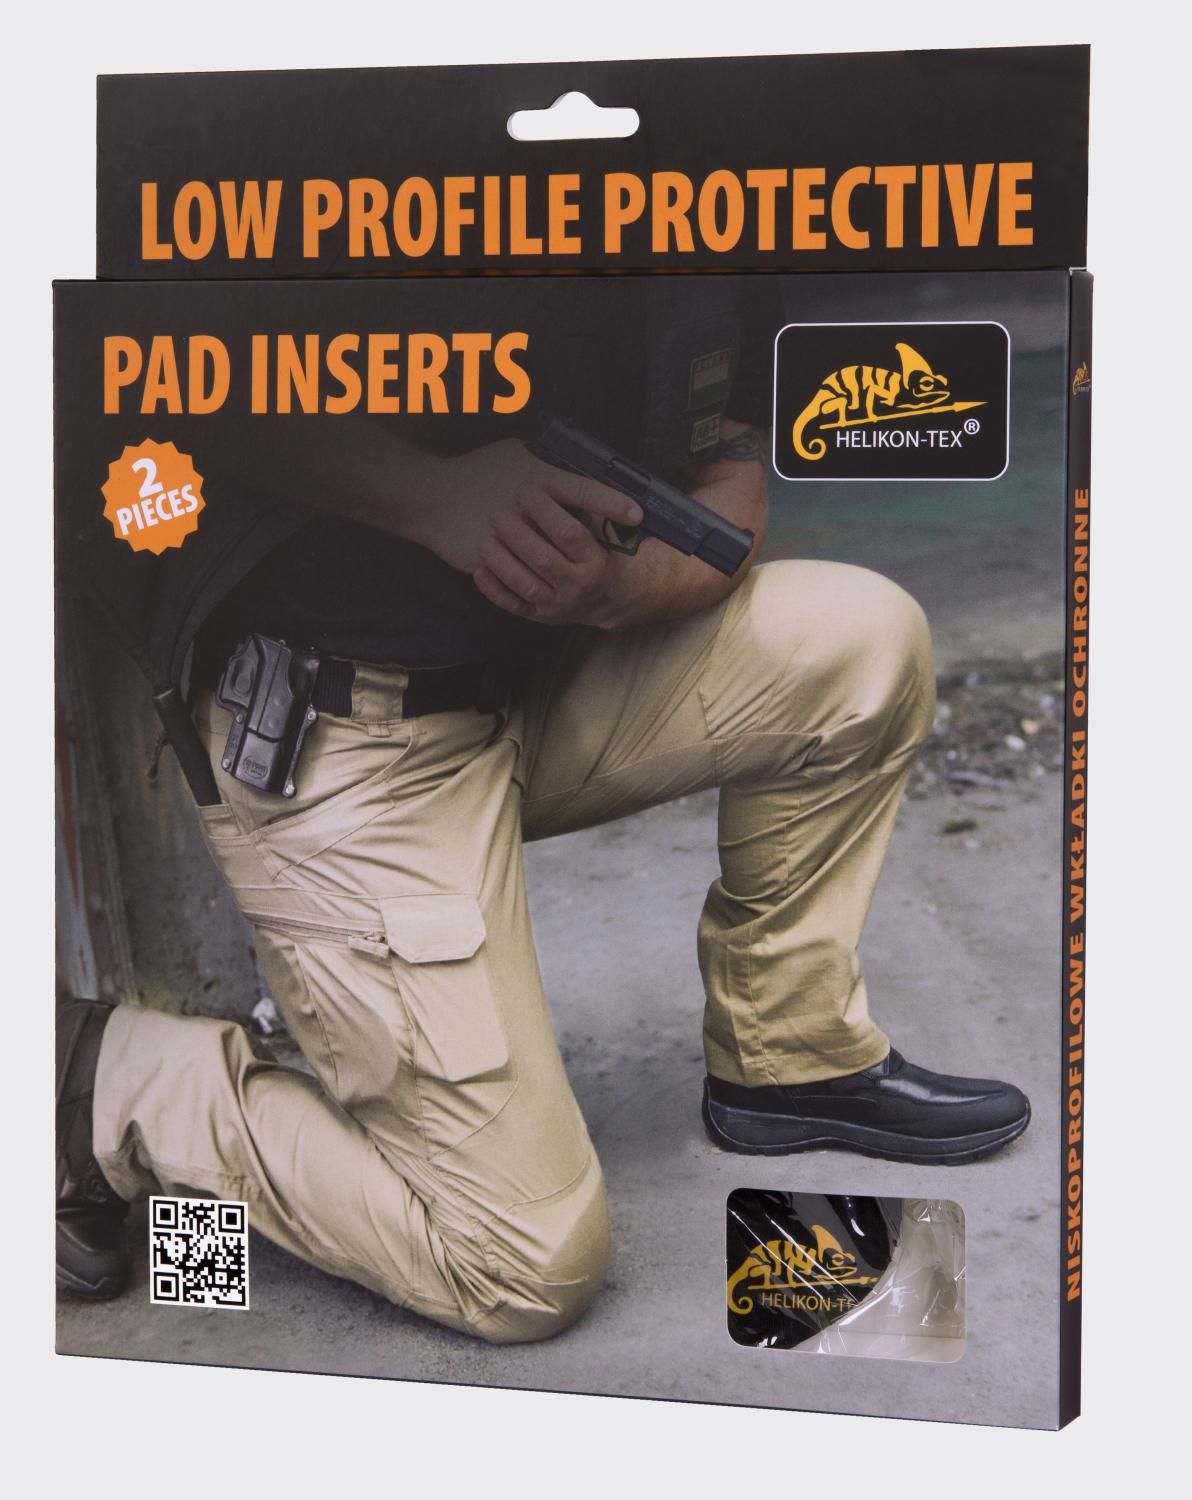 Low Profile Protective Pad Inserts